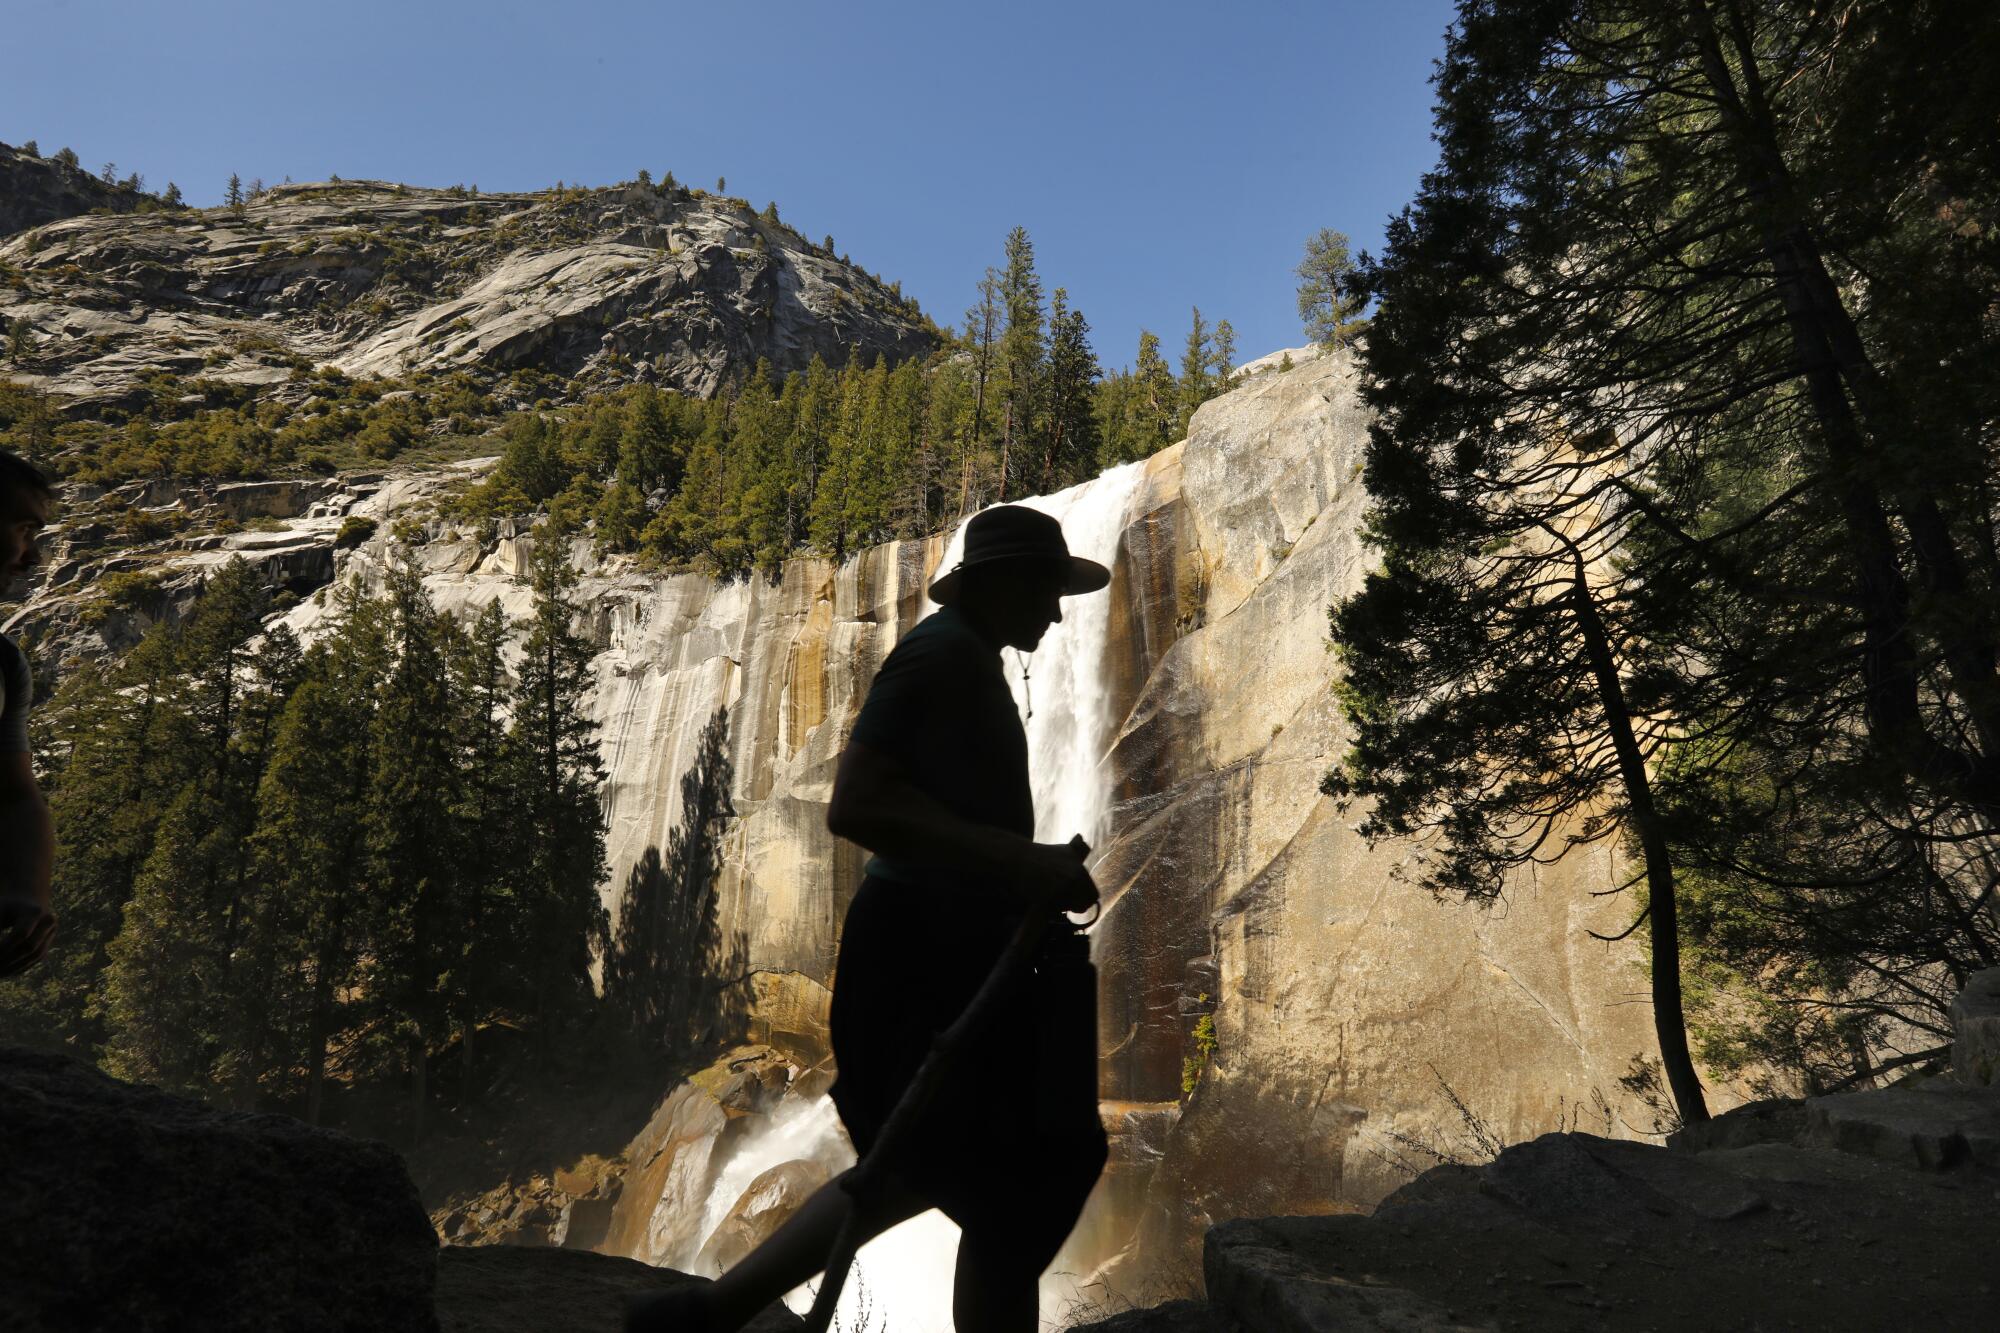 A hiker is silhouetted against a large waterfall